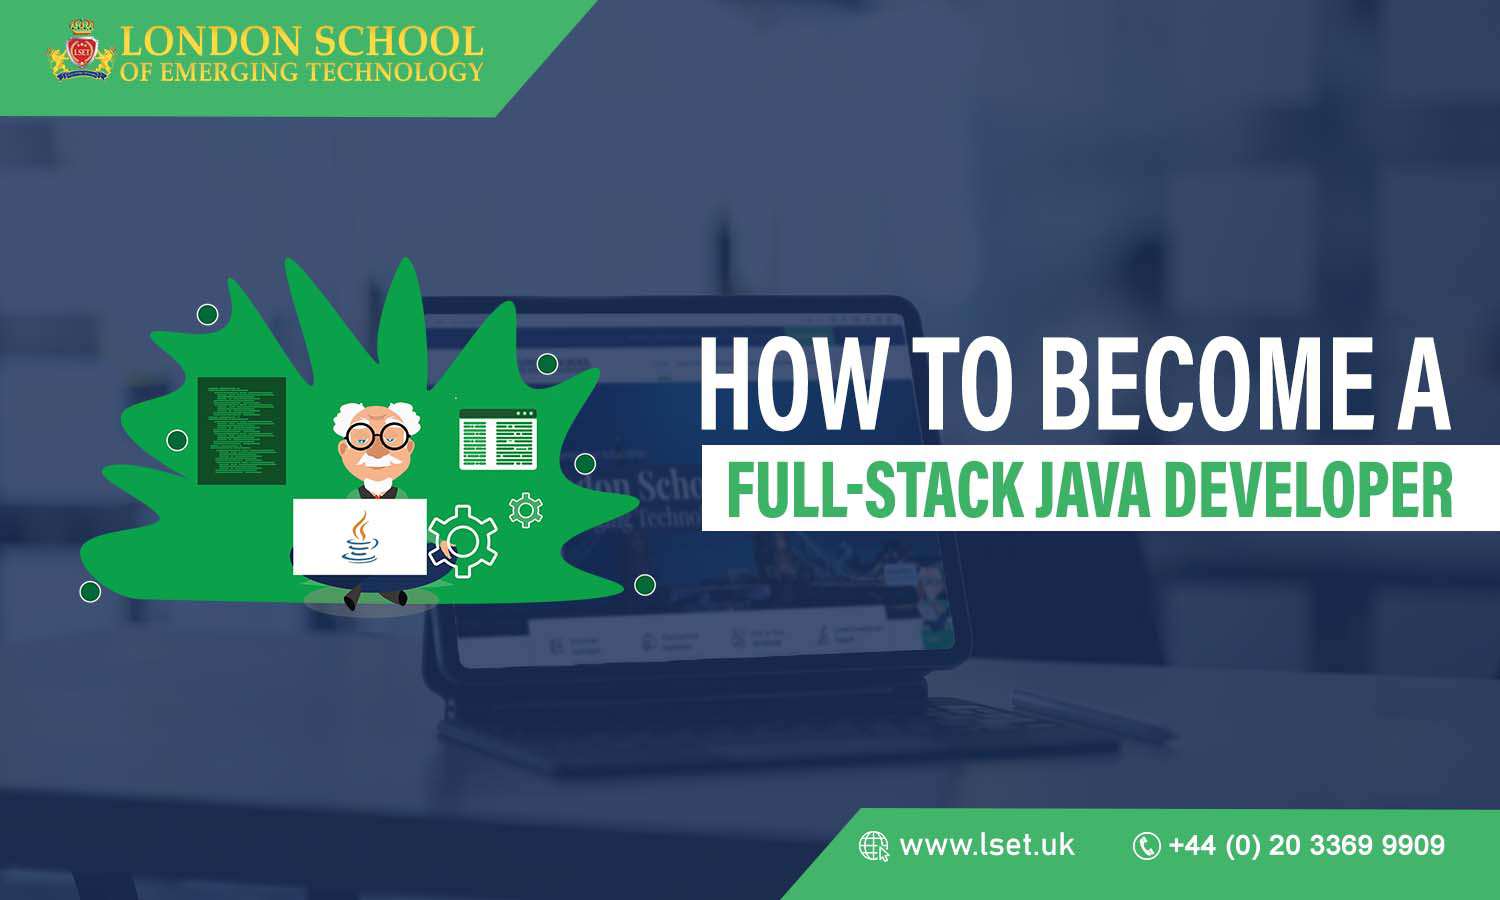 How to Become a Full-Stack Java Developer